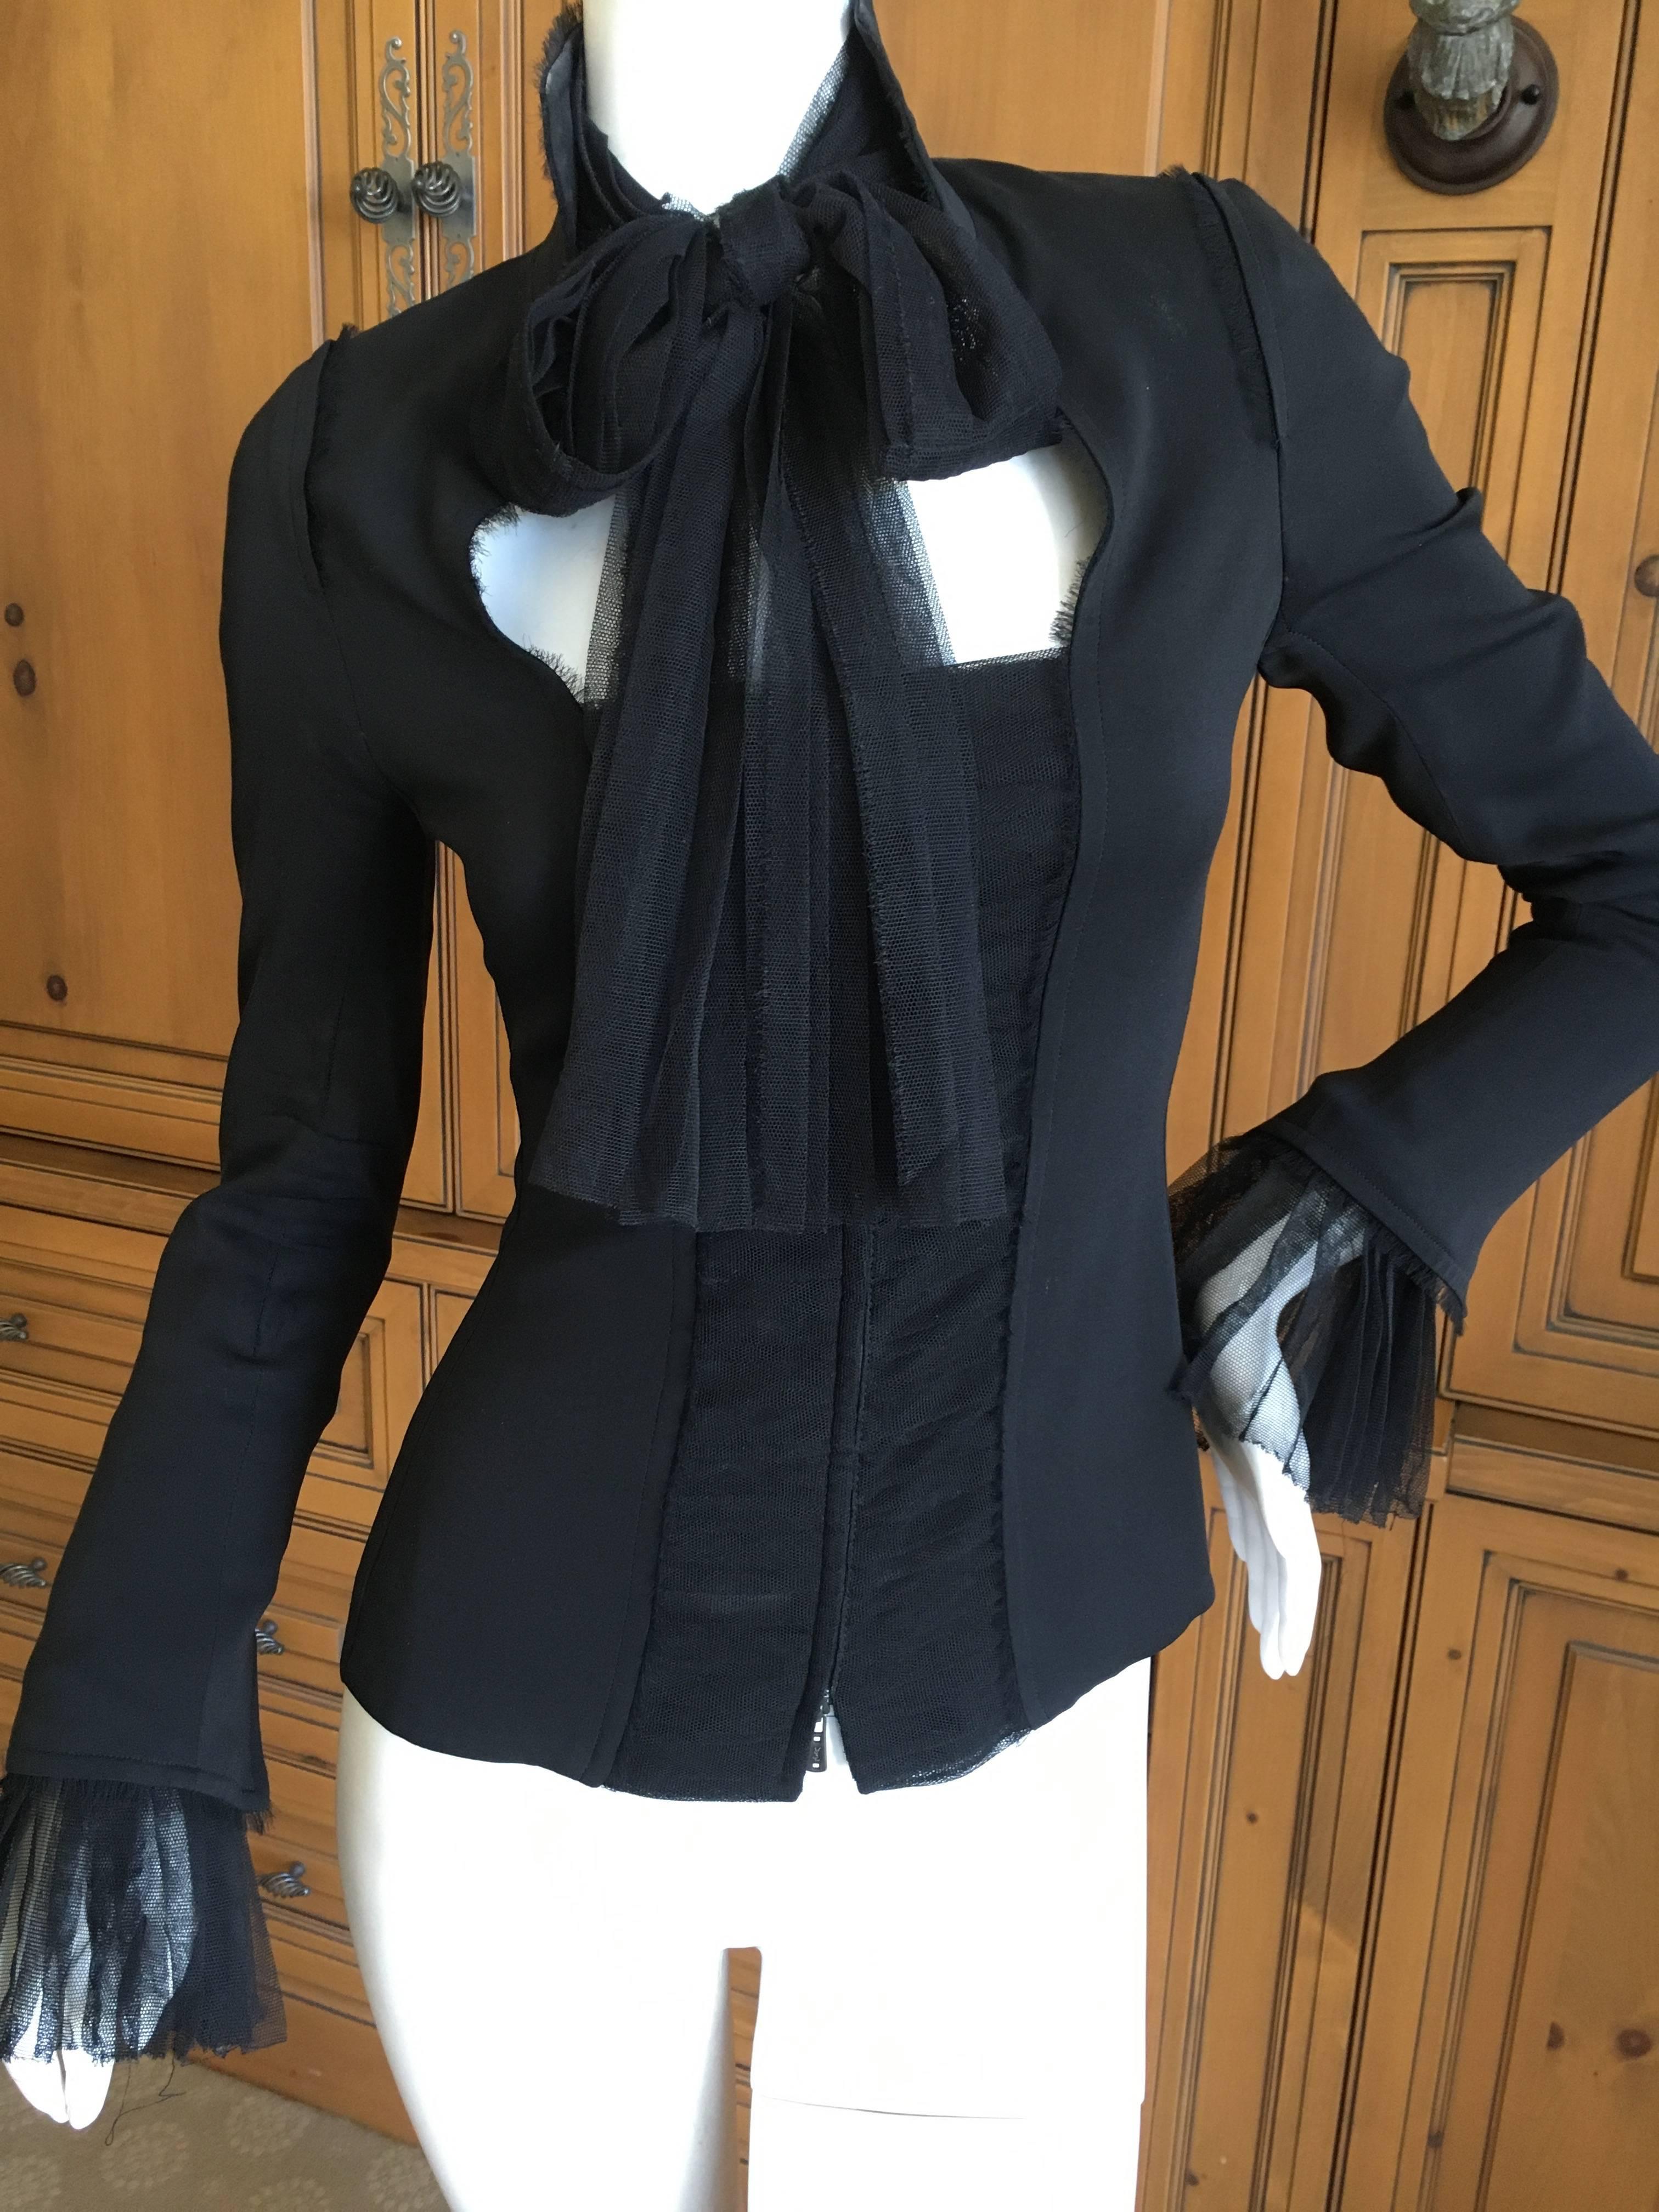 Yves Saint Laurent by Tom Ford Tie Front Black Jacket 3